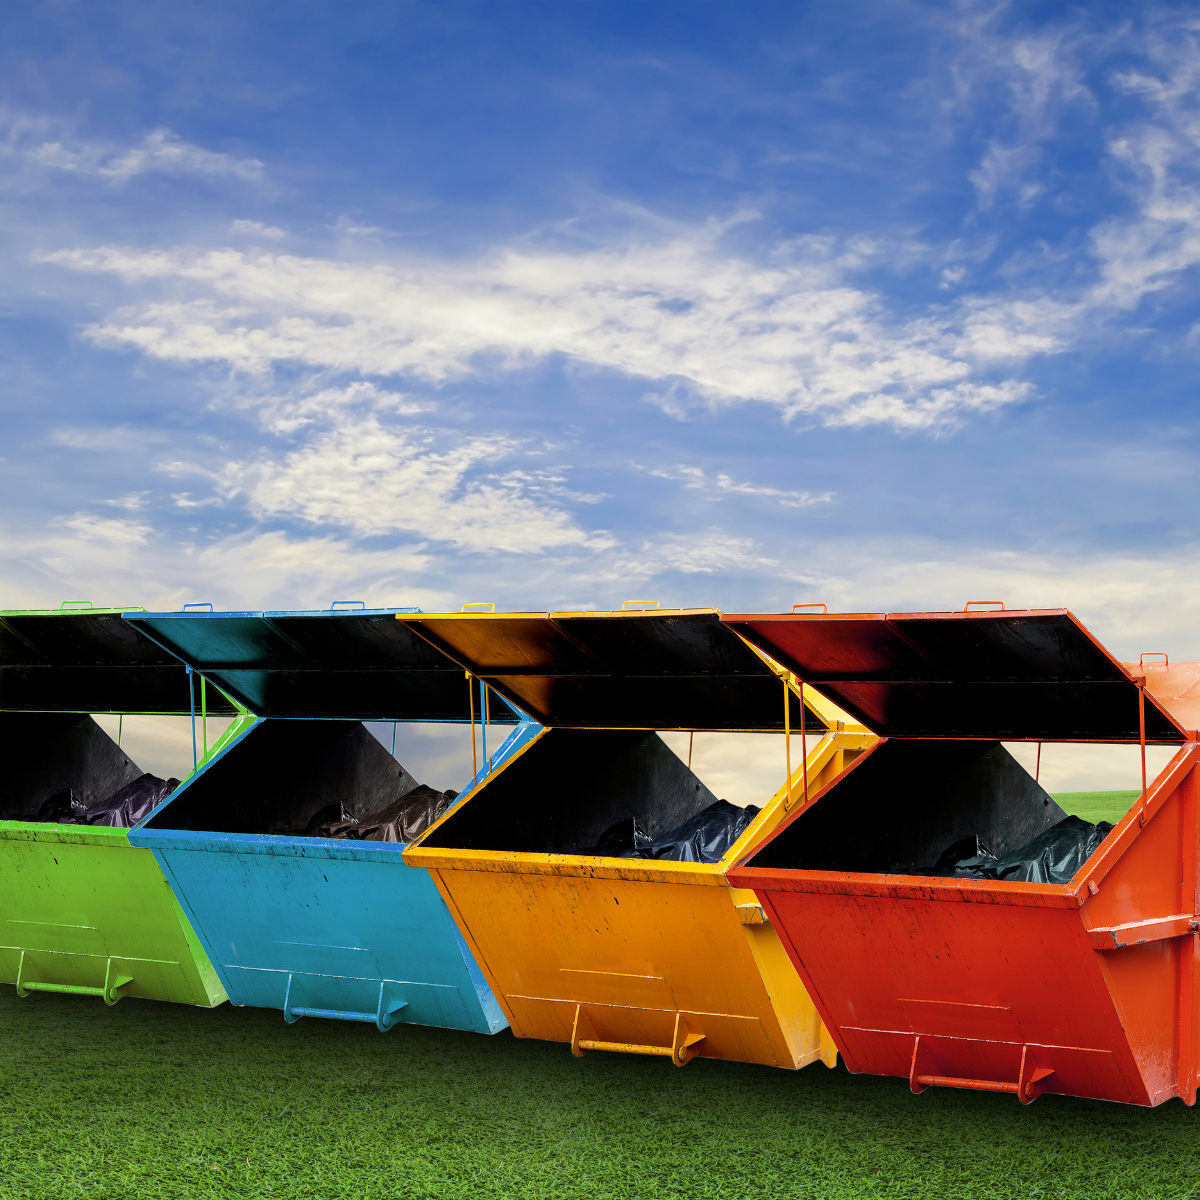 Colorful industrial dumpster